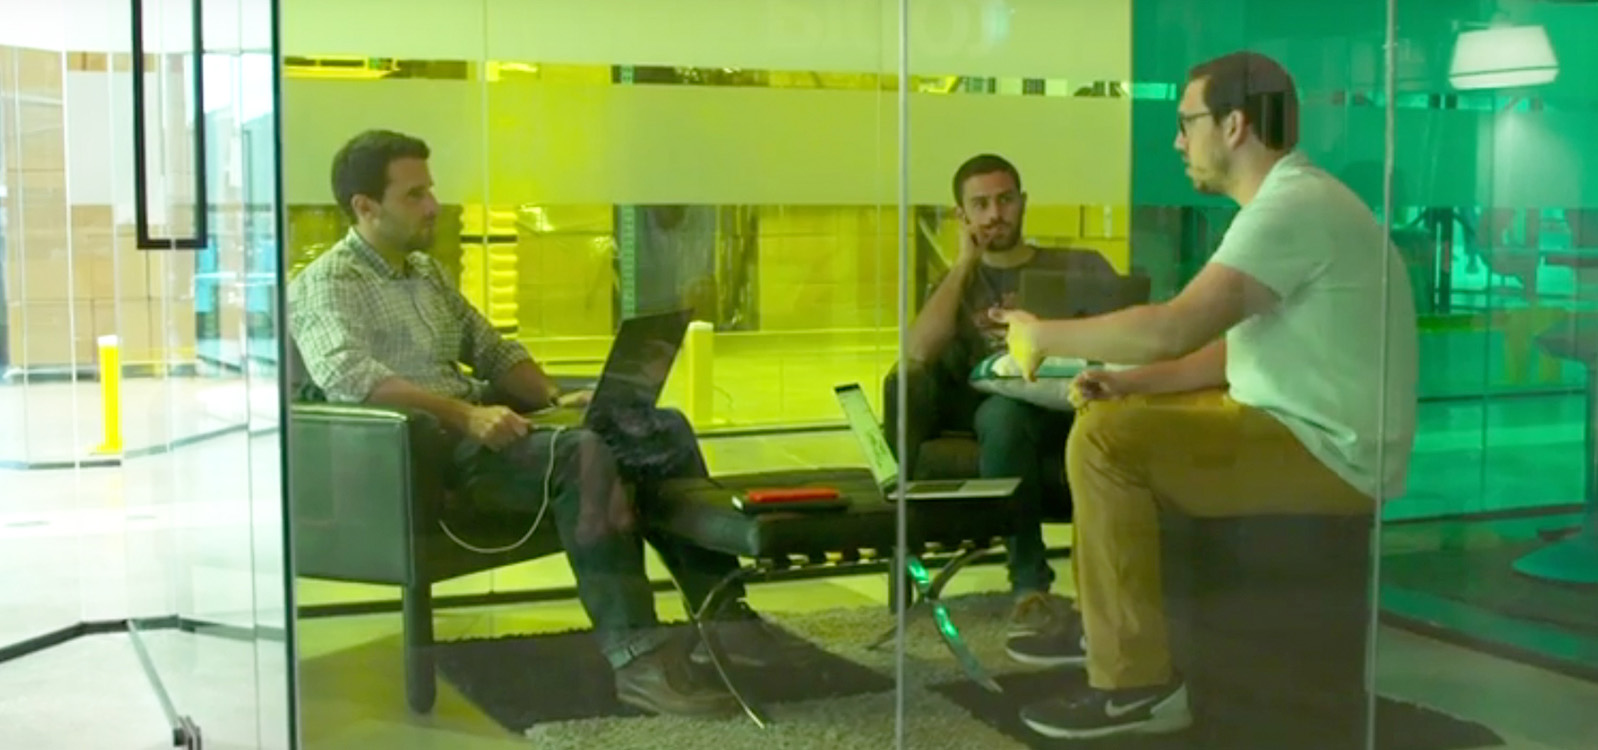 Three men meeting in a small meeting space with glass walls